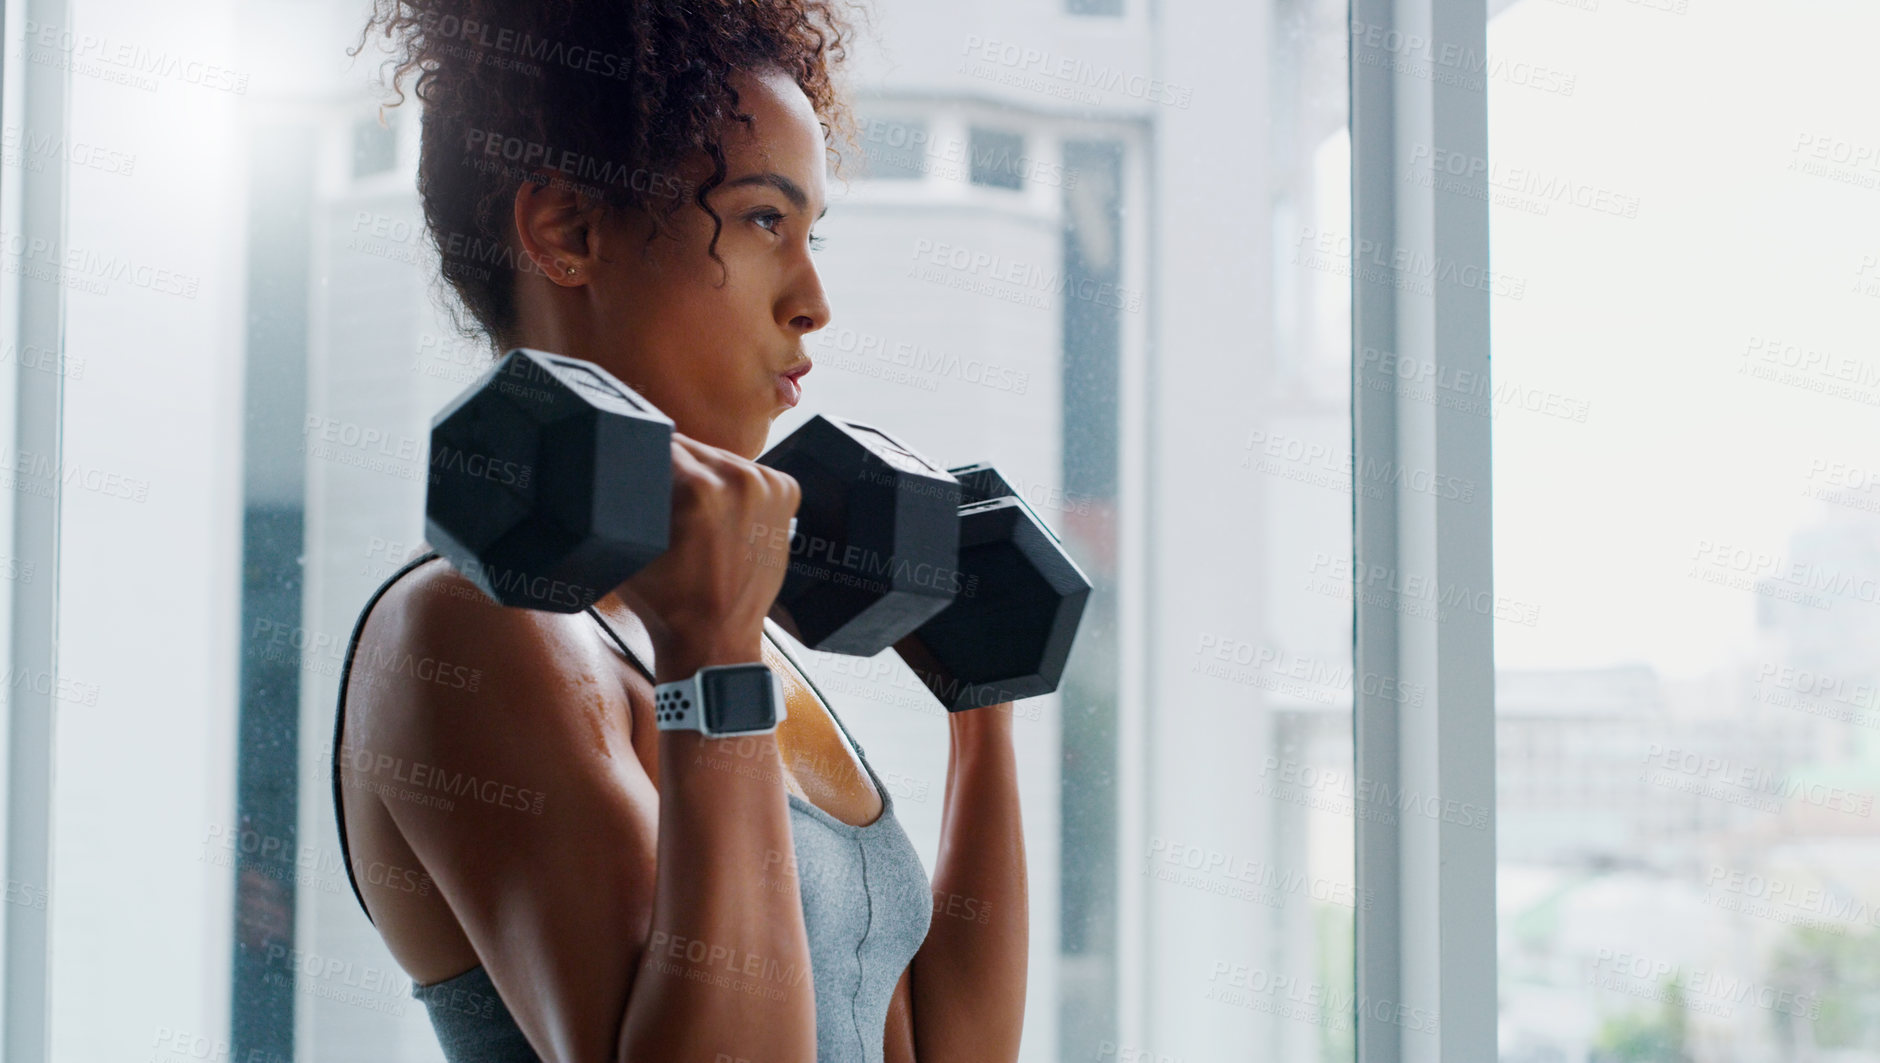 Buy stock photo Shot of a young woman working out with dumbbells in a gym